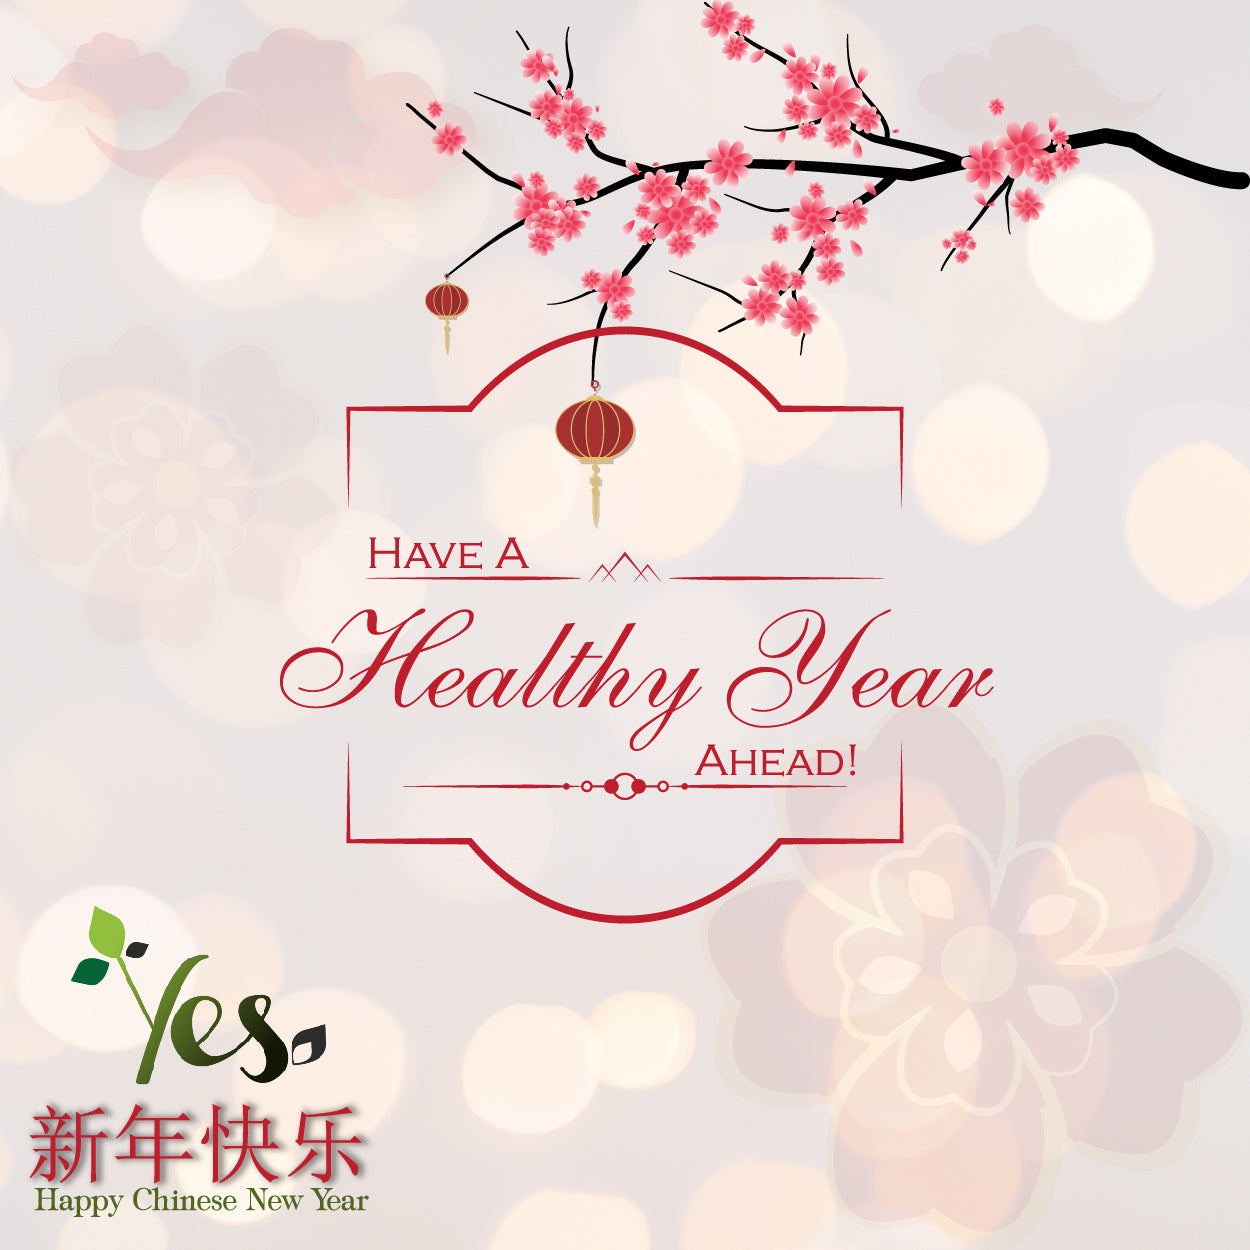 Have a Healthy Chinese New Year to all our Friends!